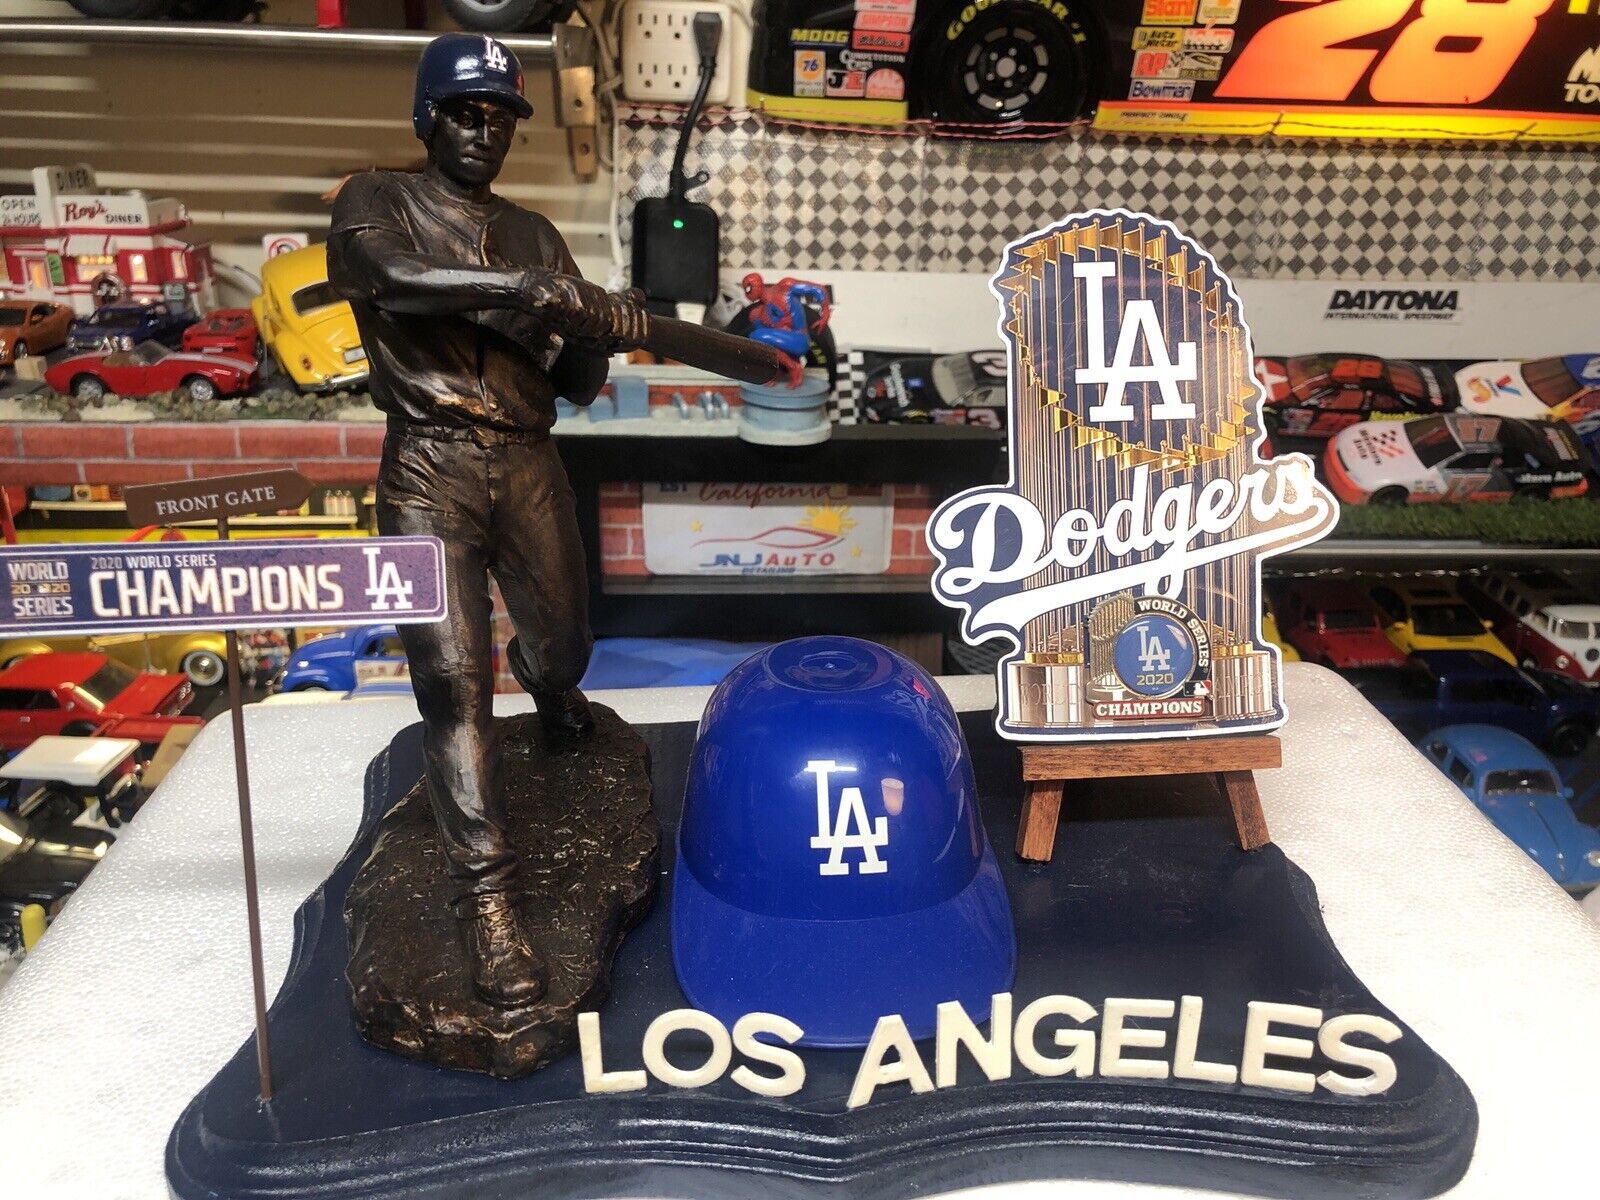 Los Angeles Dodgers 2020 Championship Collectibles